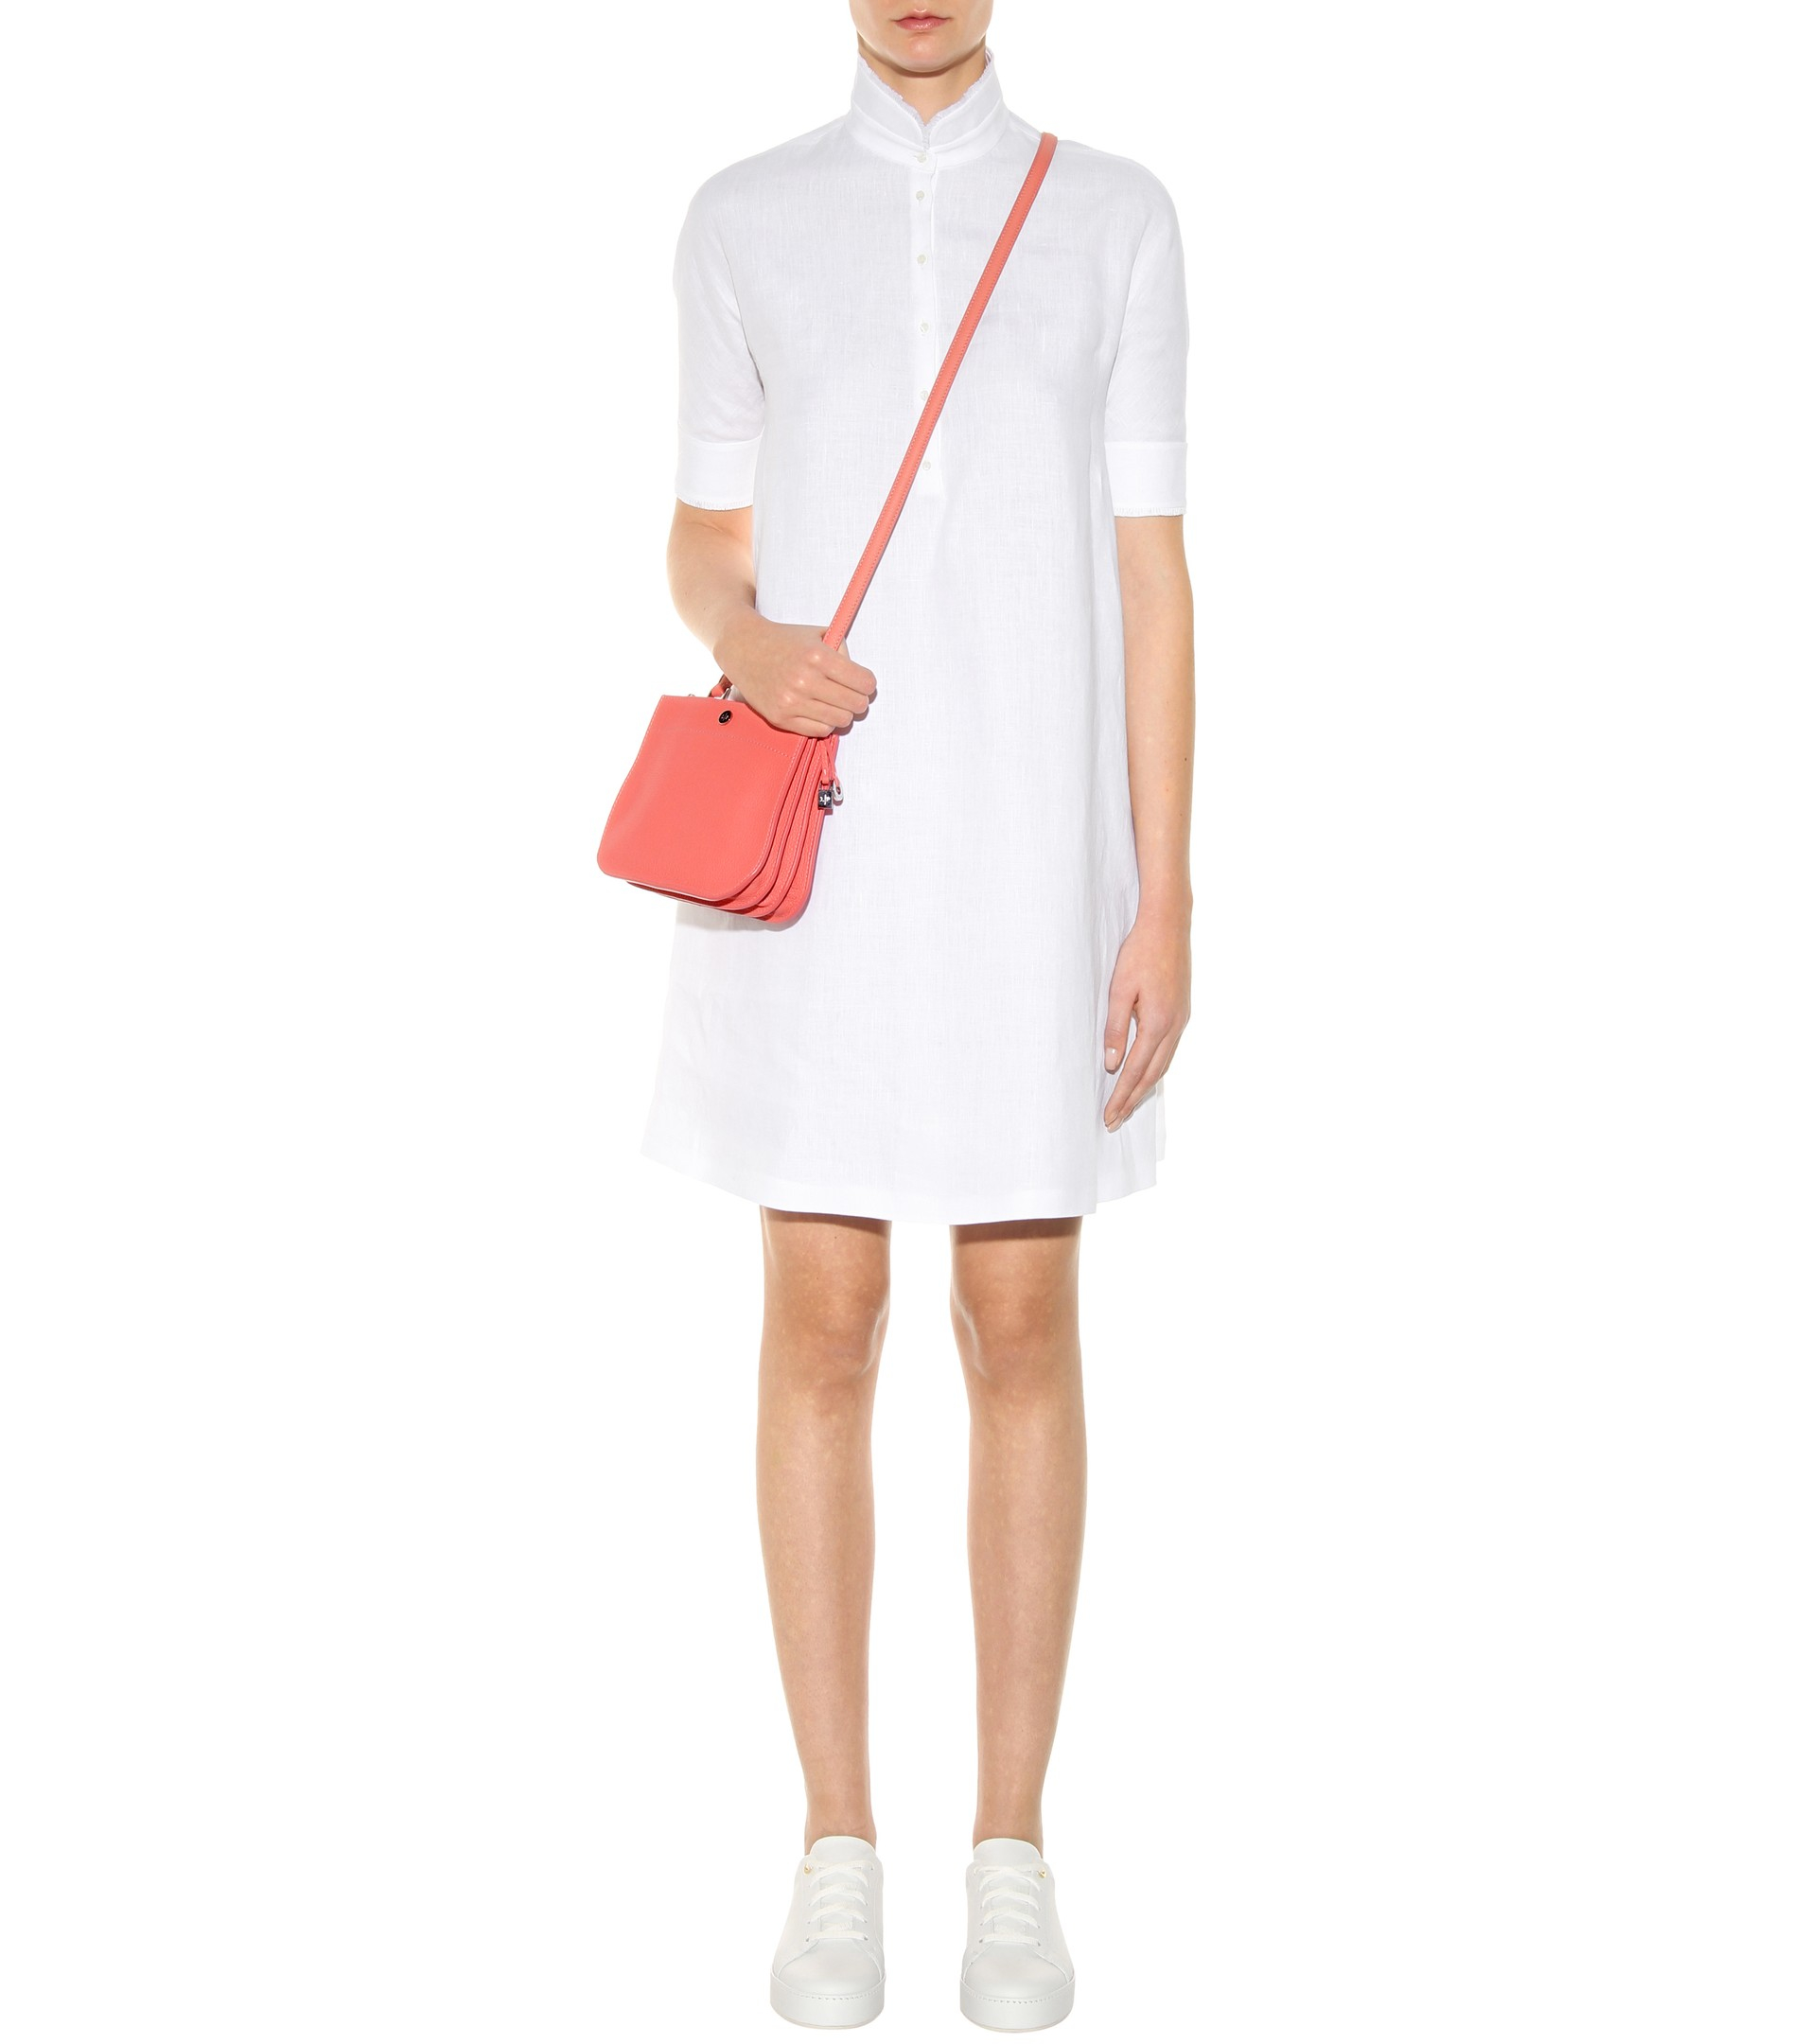 Loro Piana Milky Way Leather Shoulder Bag in Pink - Lyst